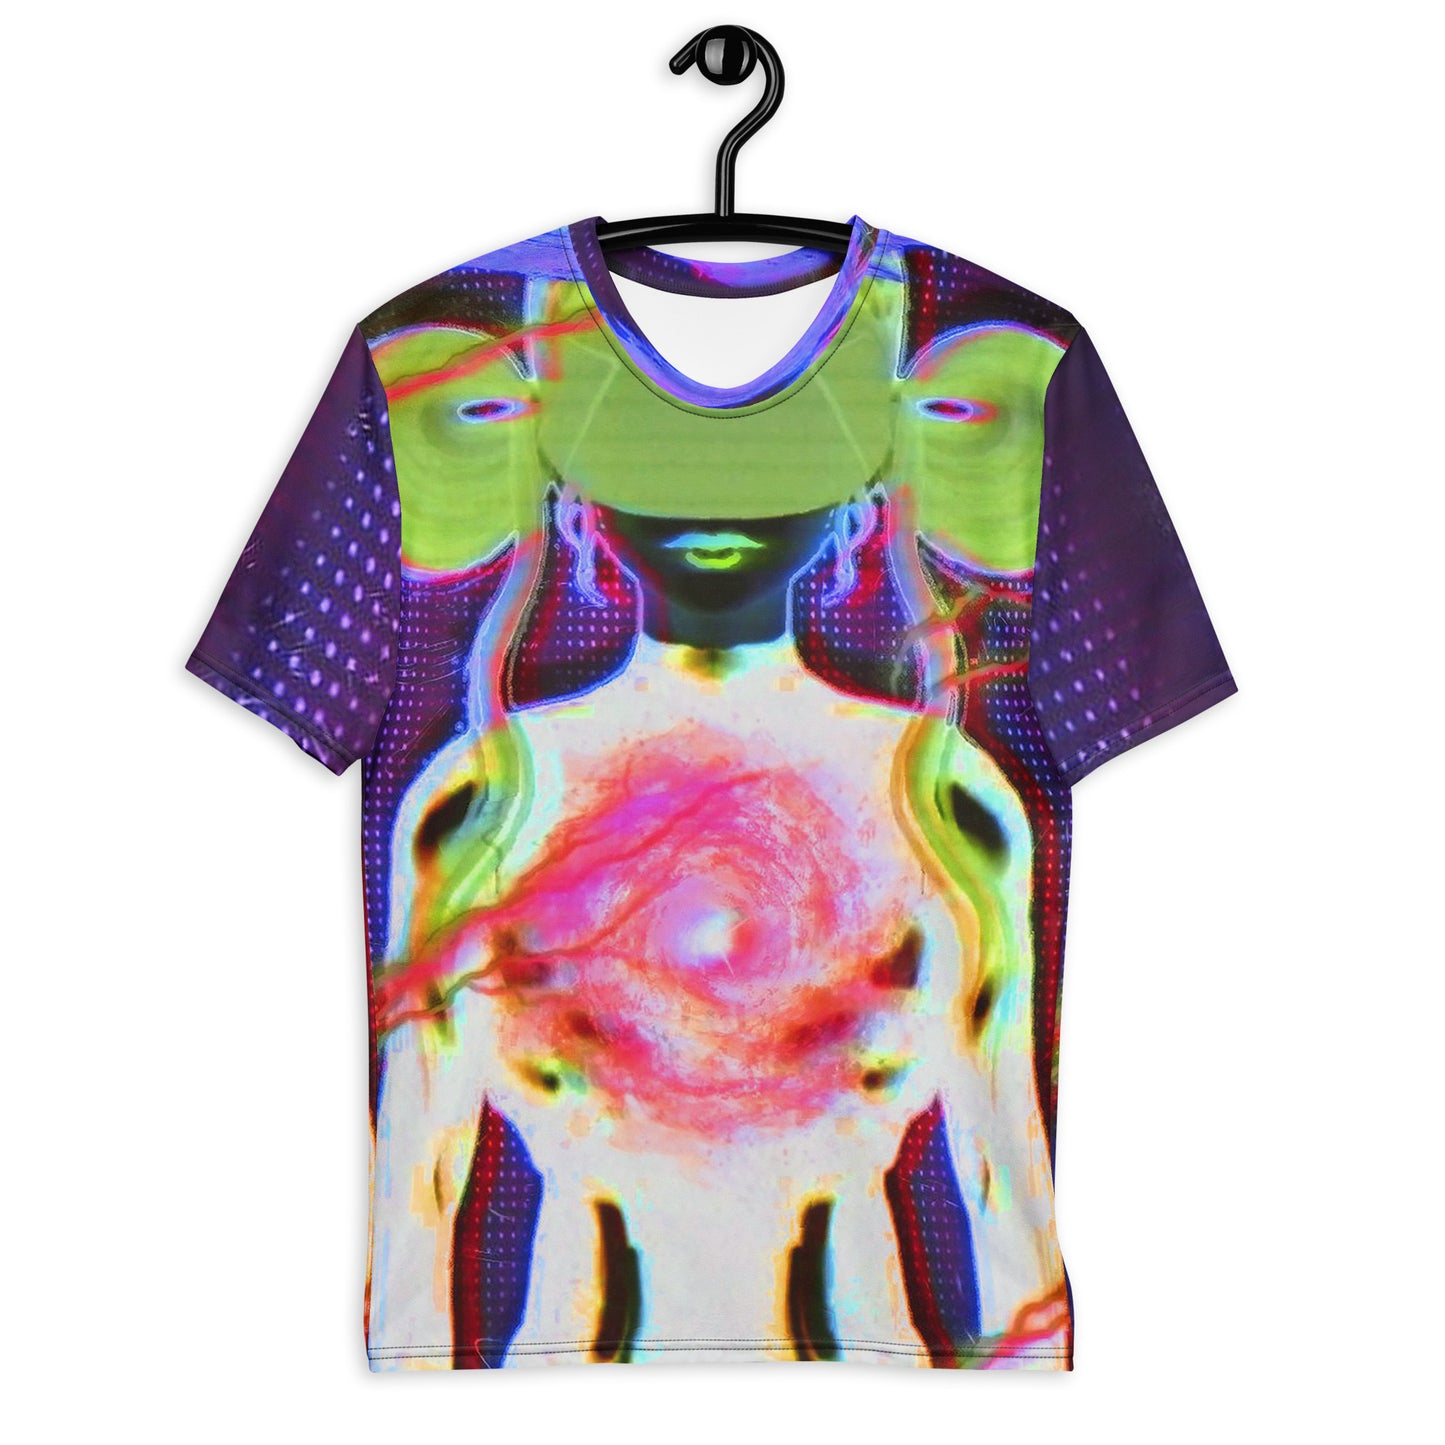 CYBERB*TCH ALL-OVER SHIRT